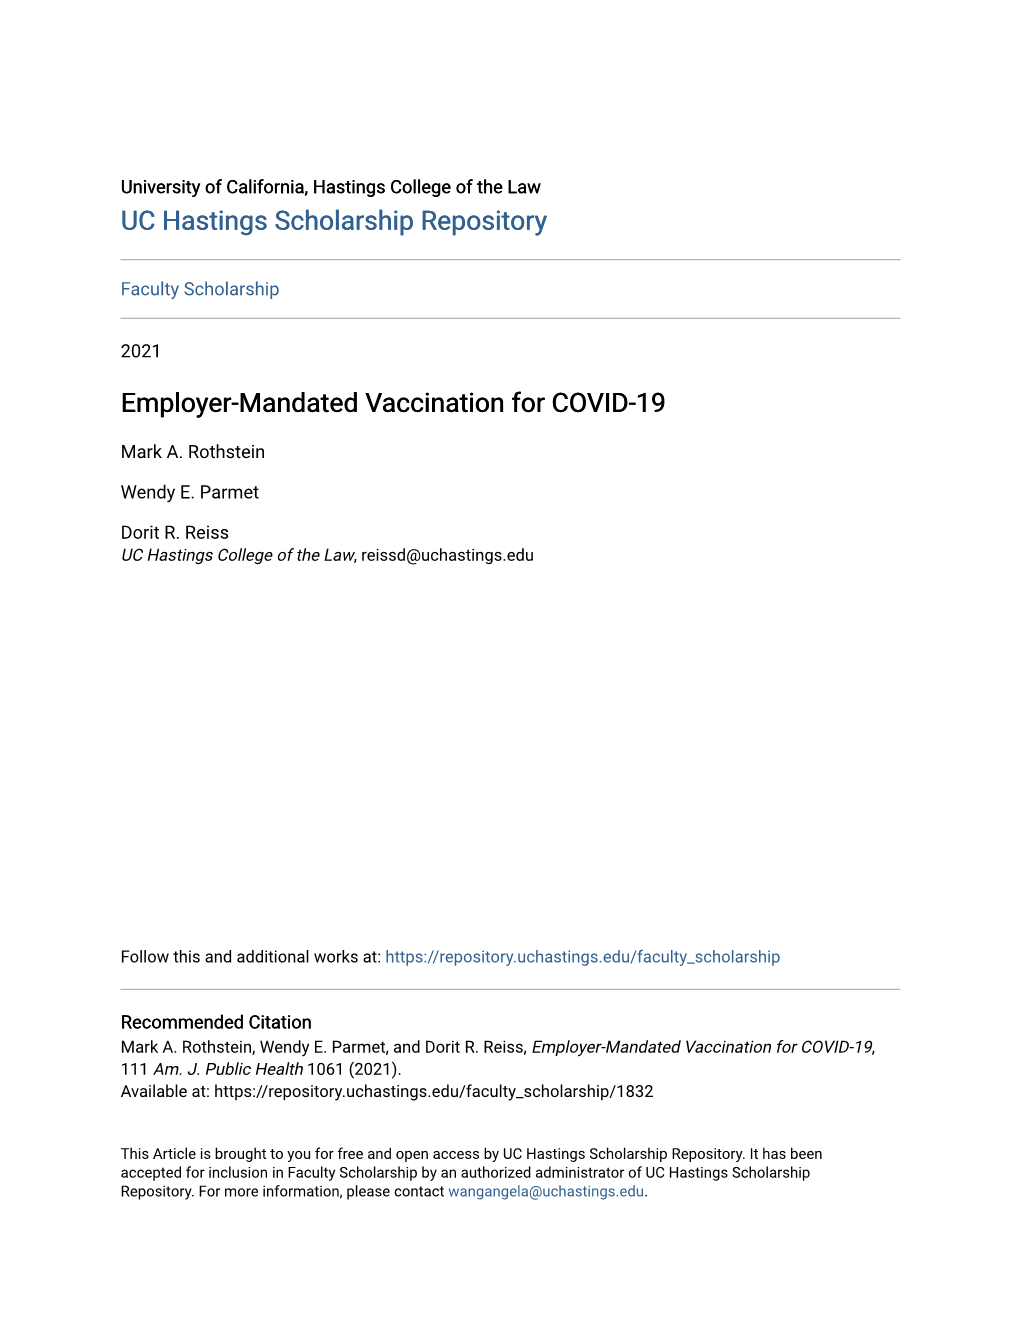 Employer-Mandated Vaccination for COVID-19